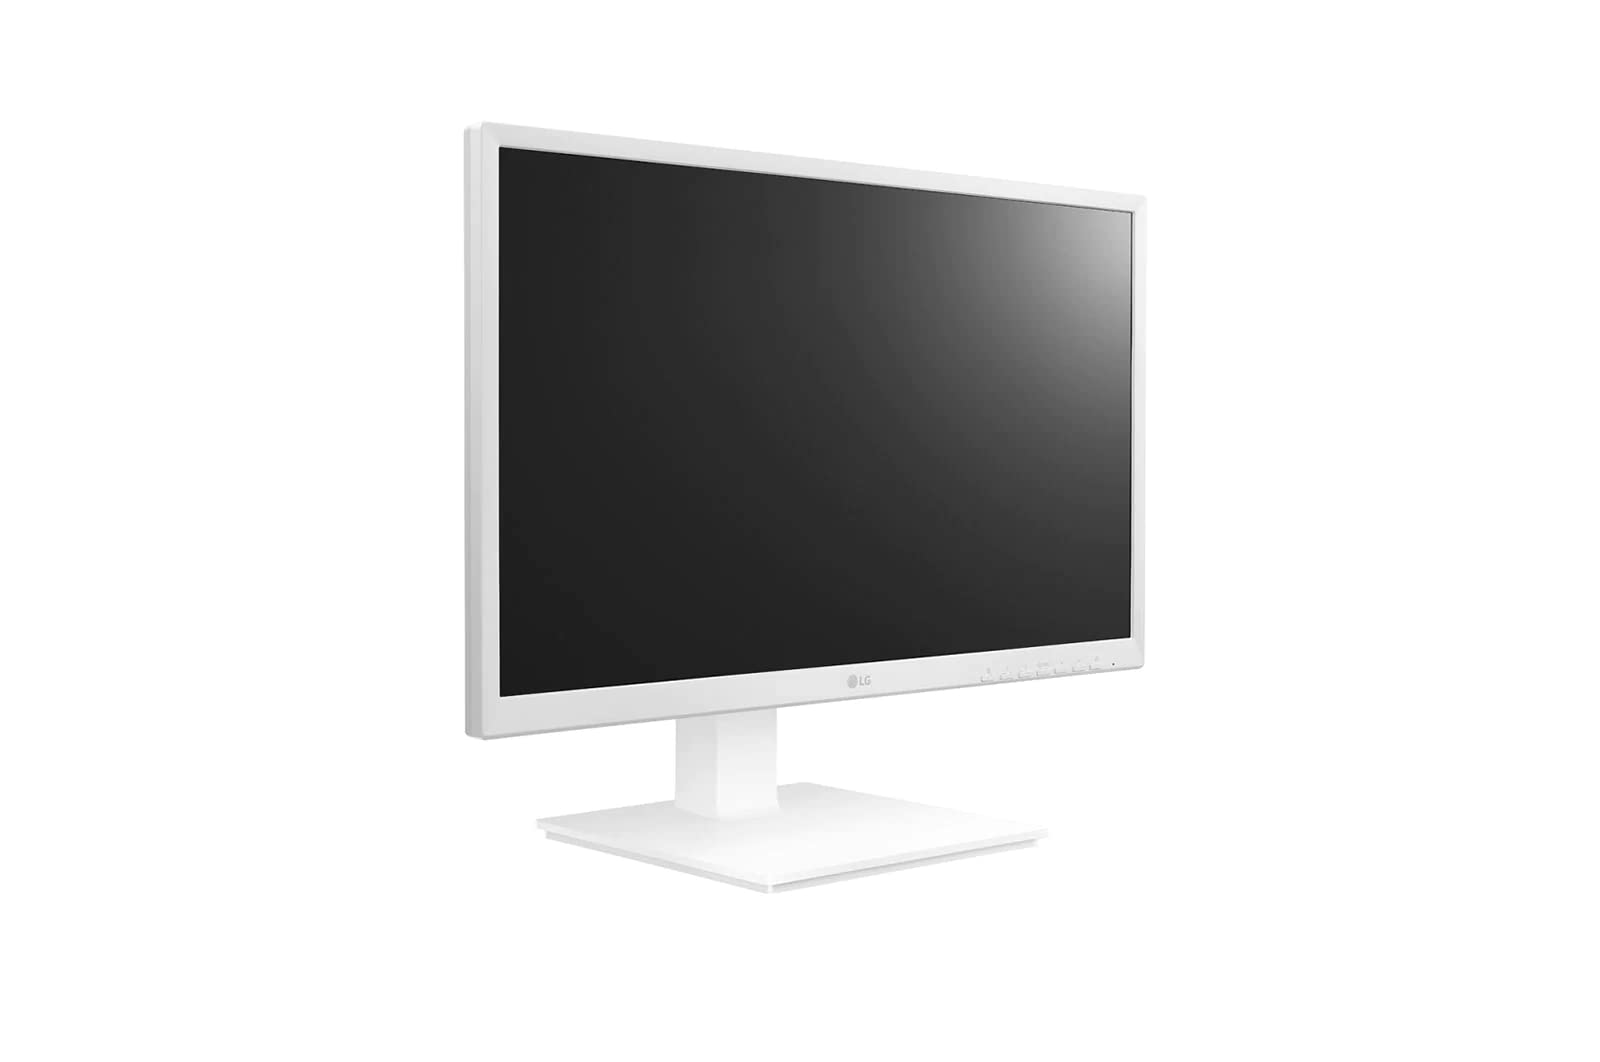 LG 24” 24CK560N-3A All-in-One FHD IPS Thin Client for Medical & Healthcare with Fanless & Ergonomic Design